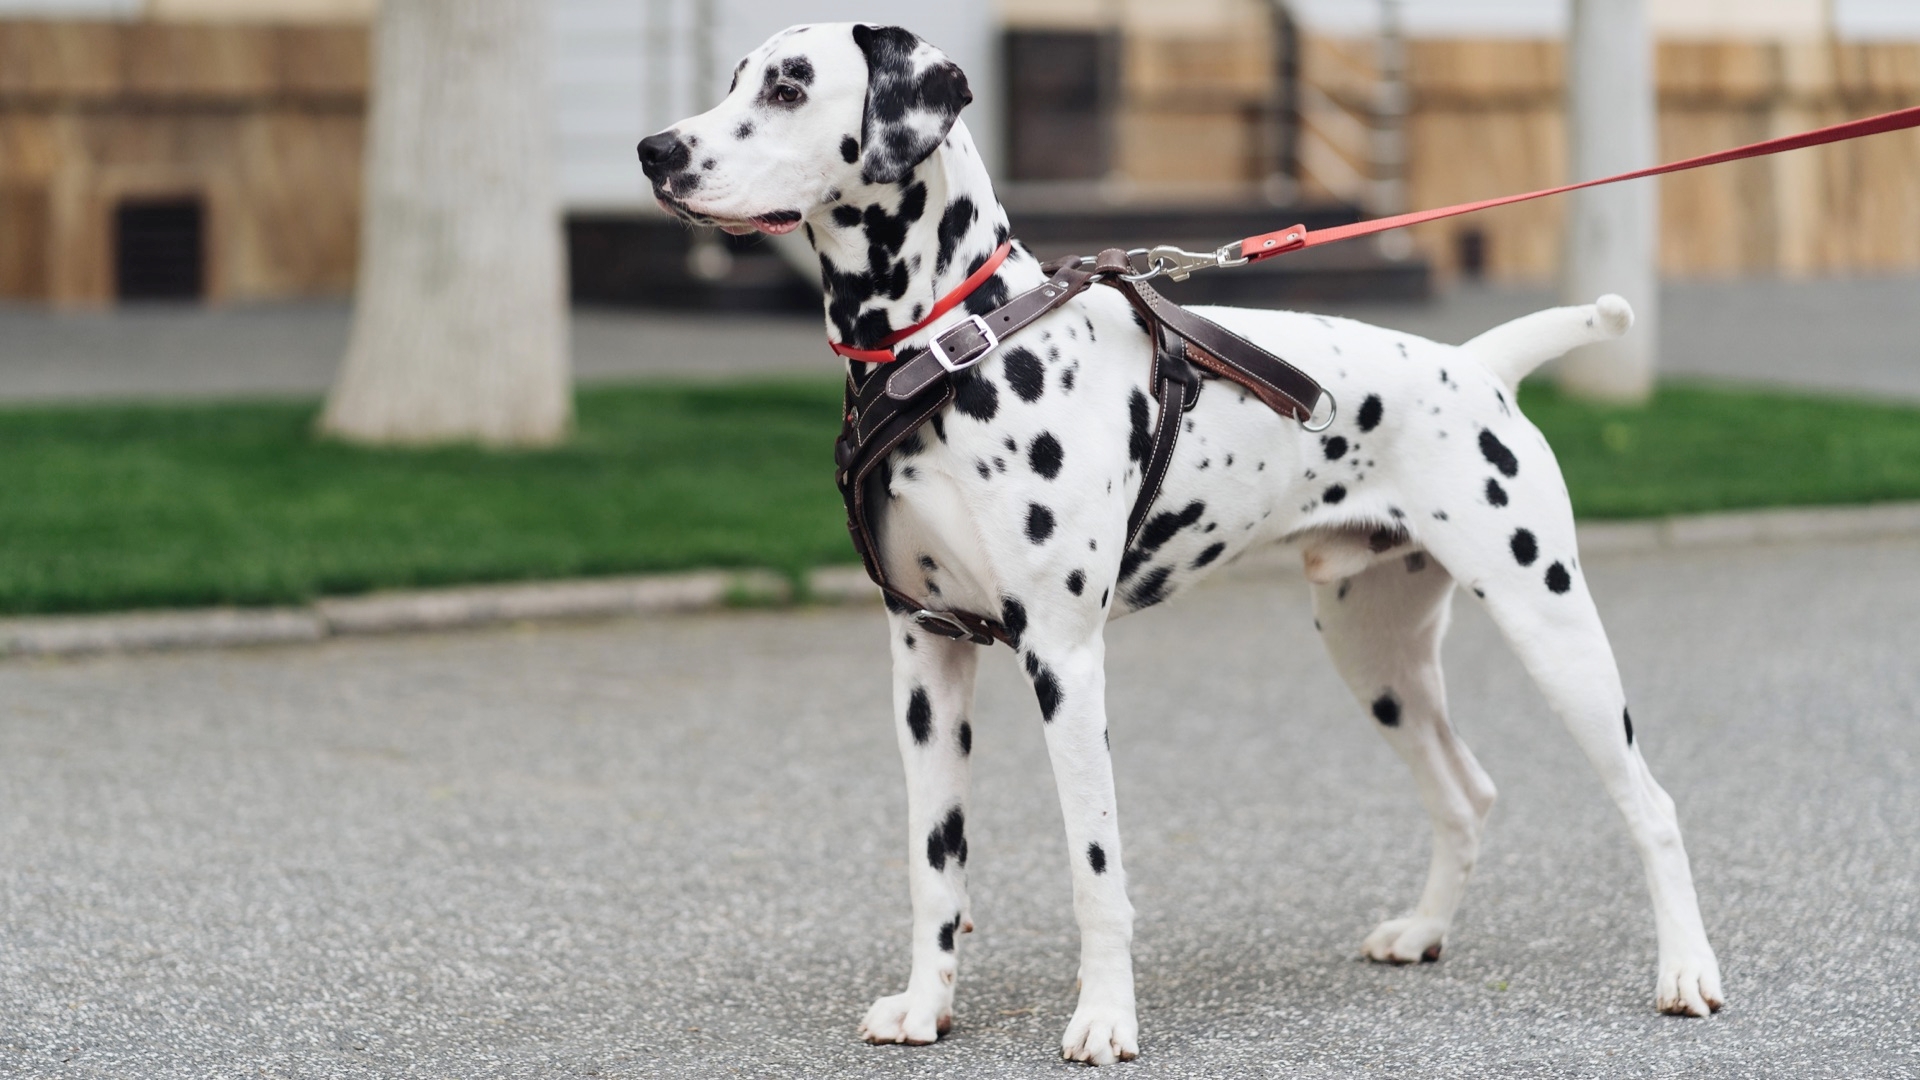 These Leashes Are The Best, For Training Your Pup To Be A Top Dog